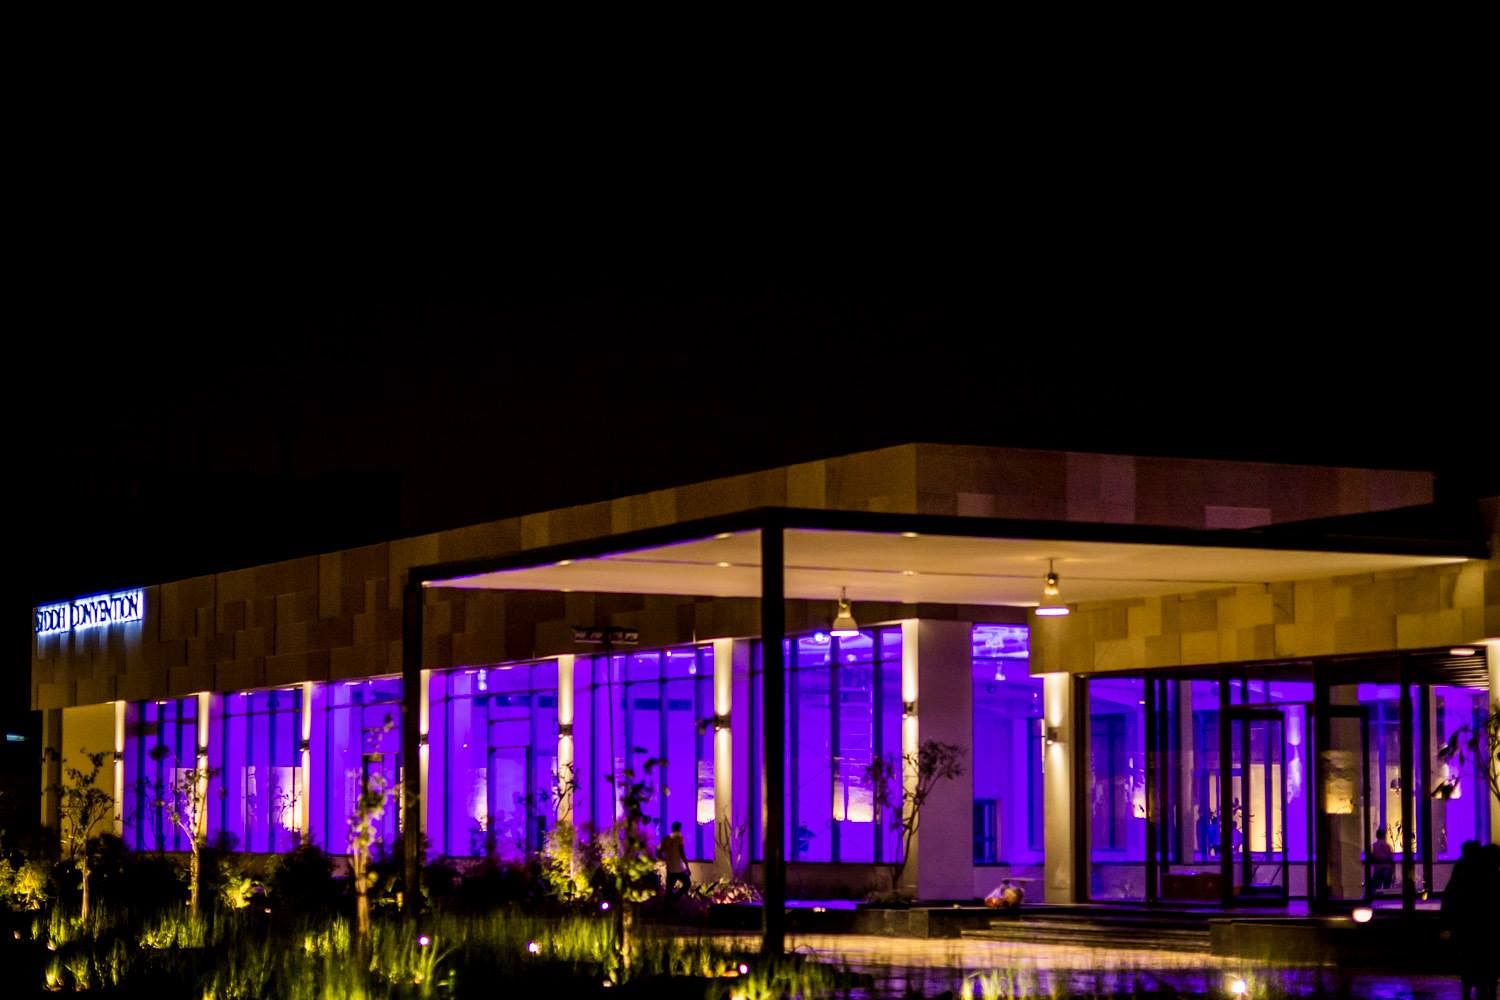 Siddh Convention Centre in Kompally, Hyderabad